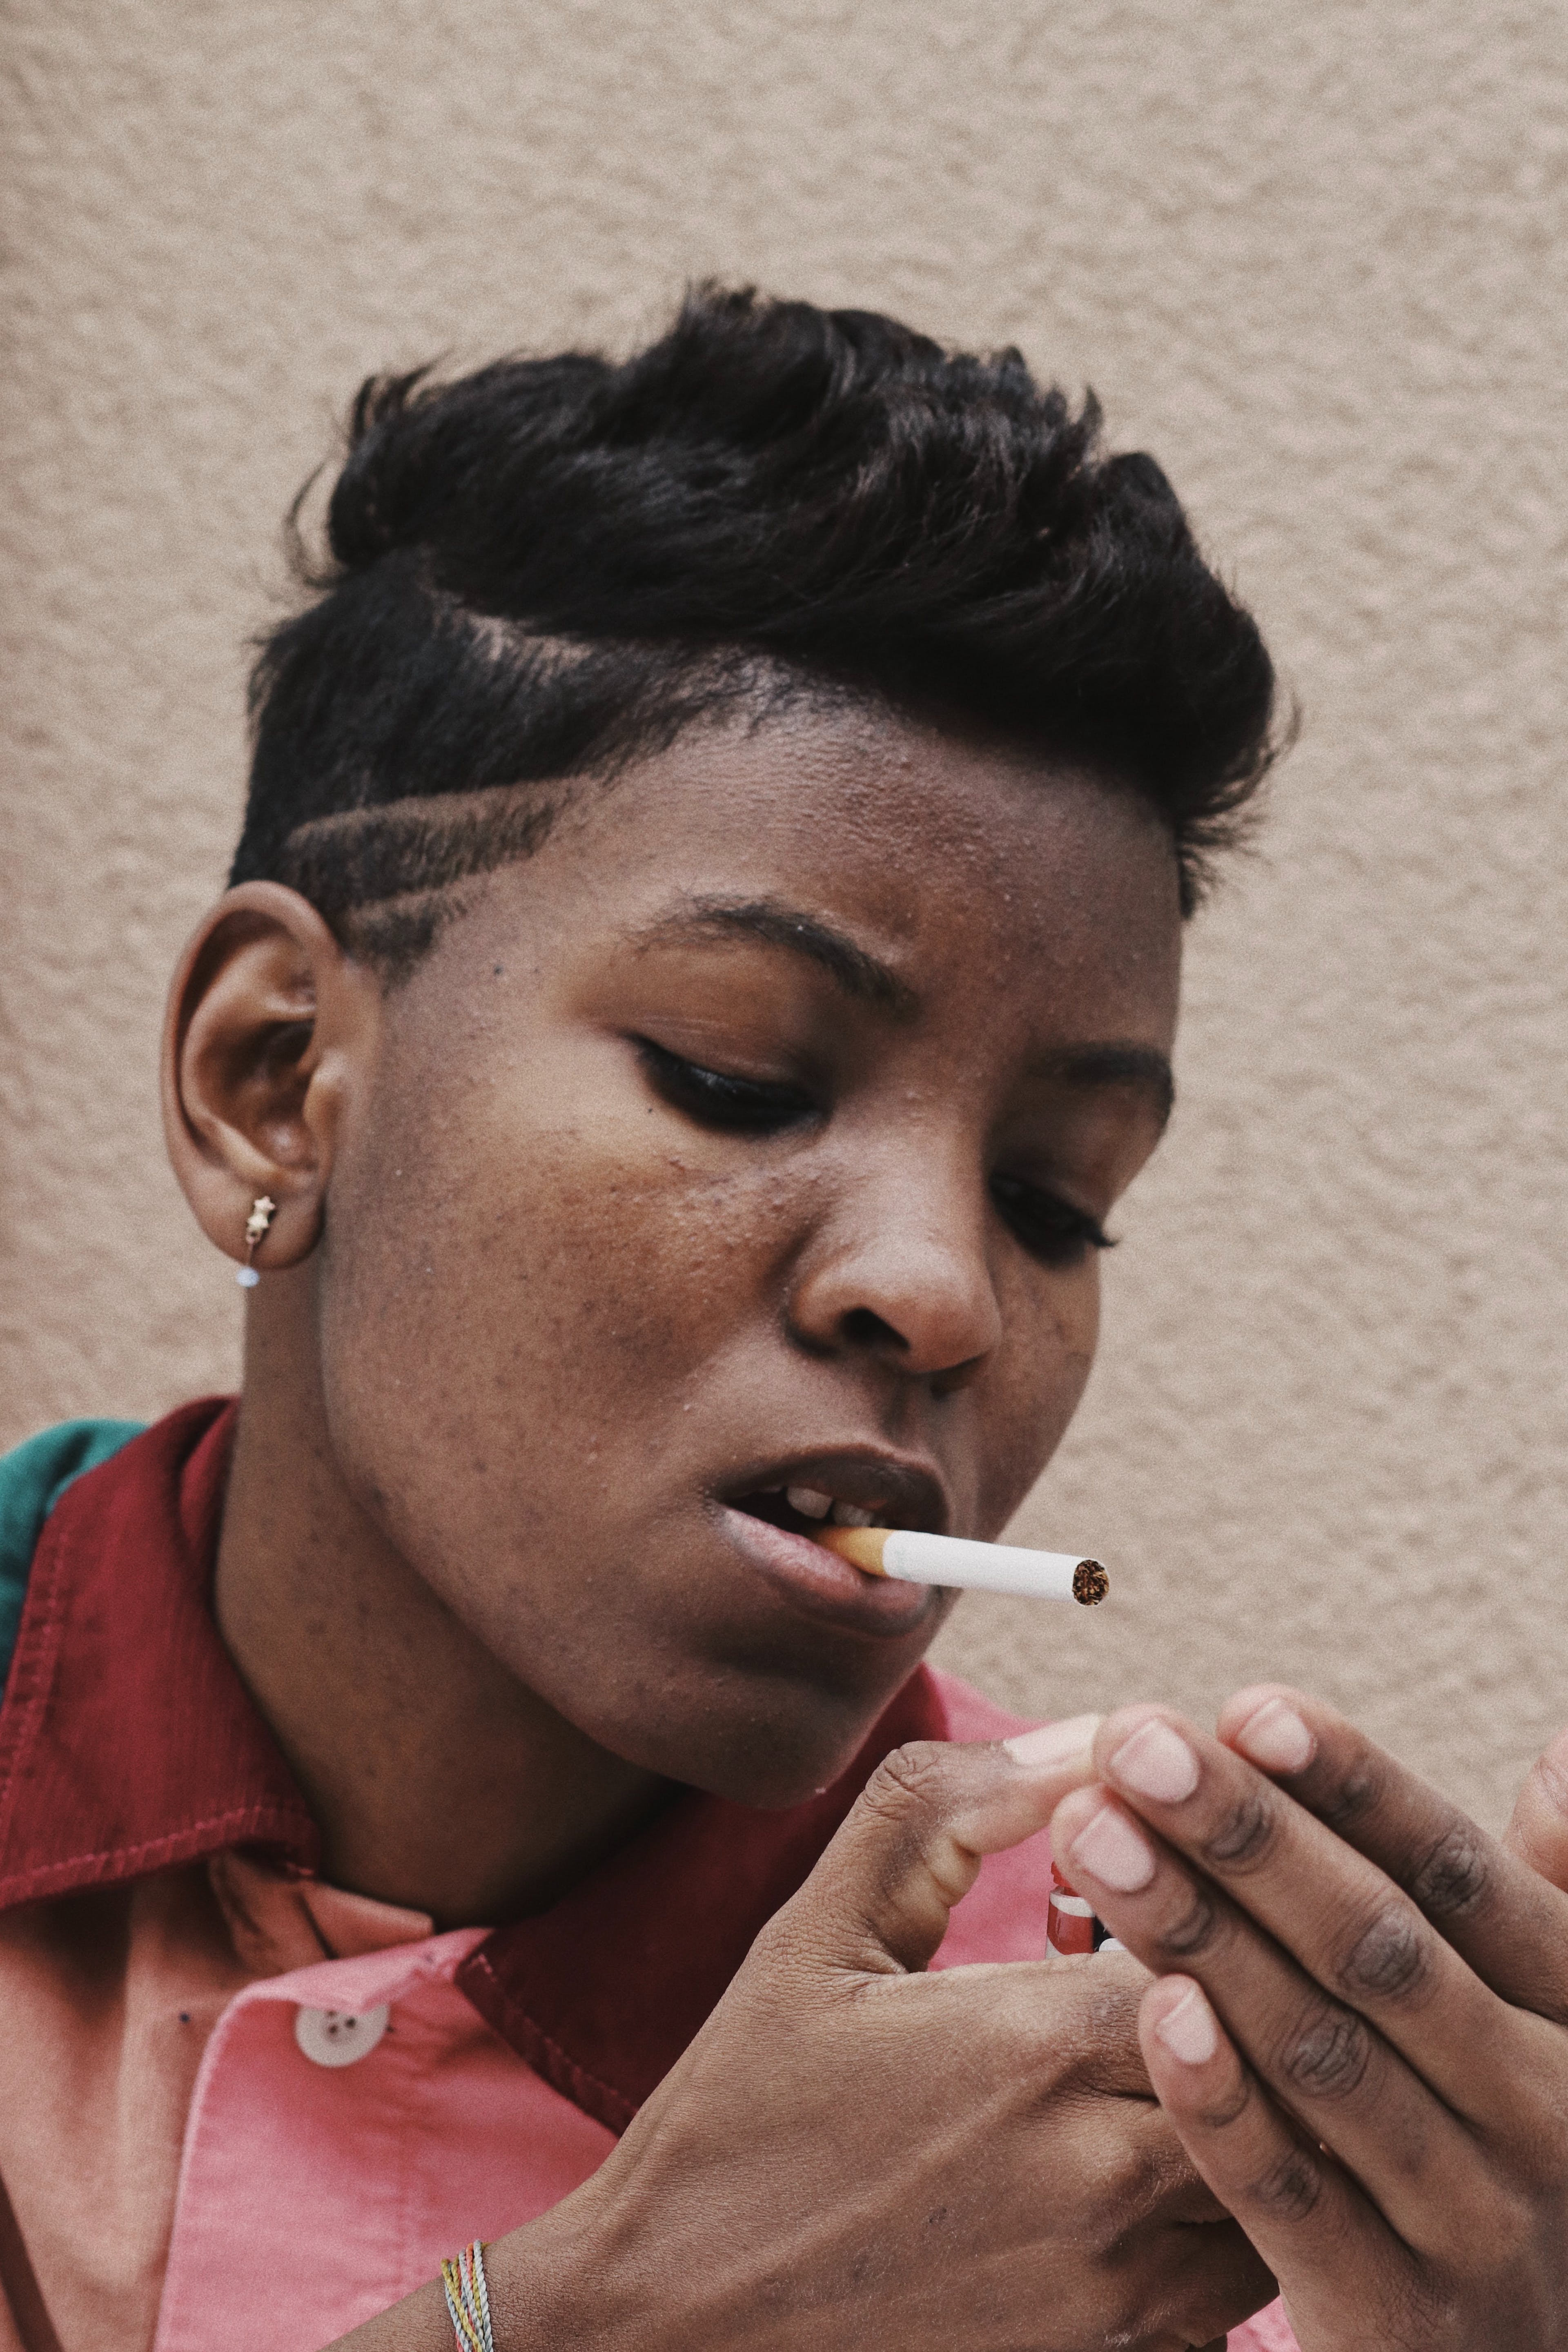 A close-up of a Back woman with short hair lighting a cigarette.